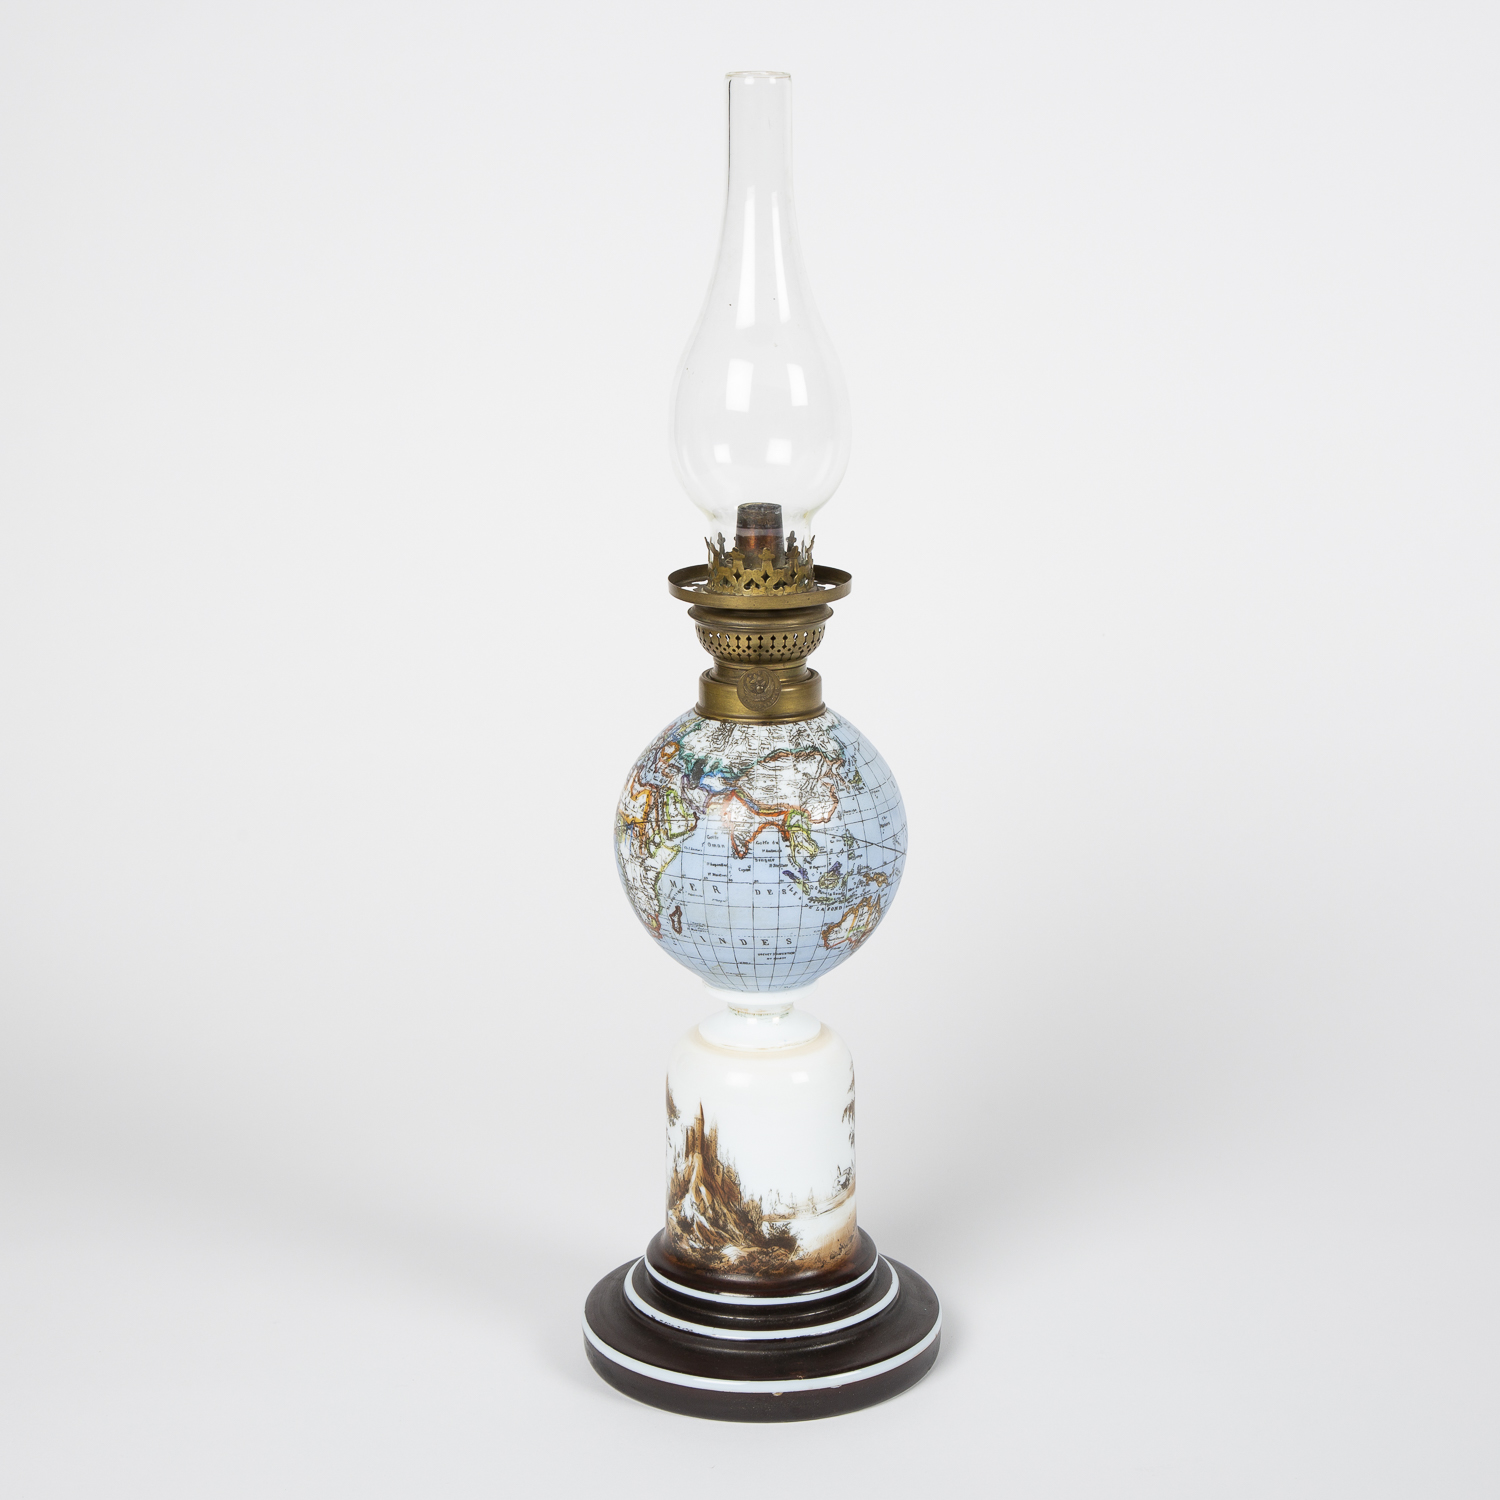 Late 19th century oil lamp with a terrestrial globe